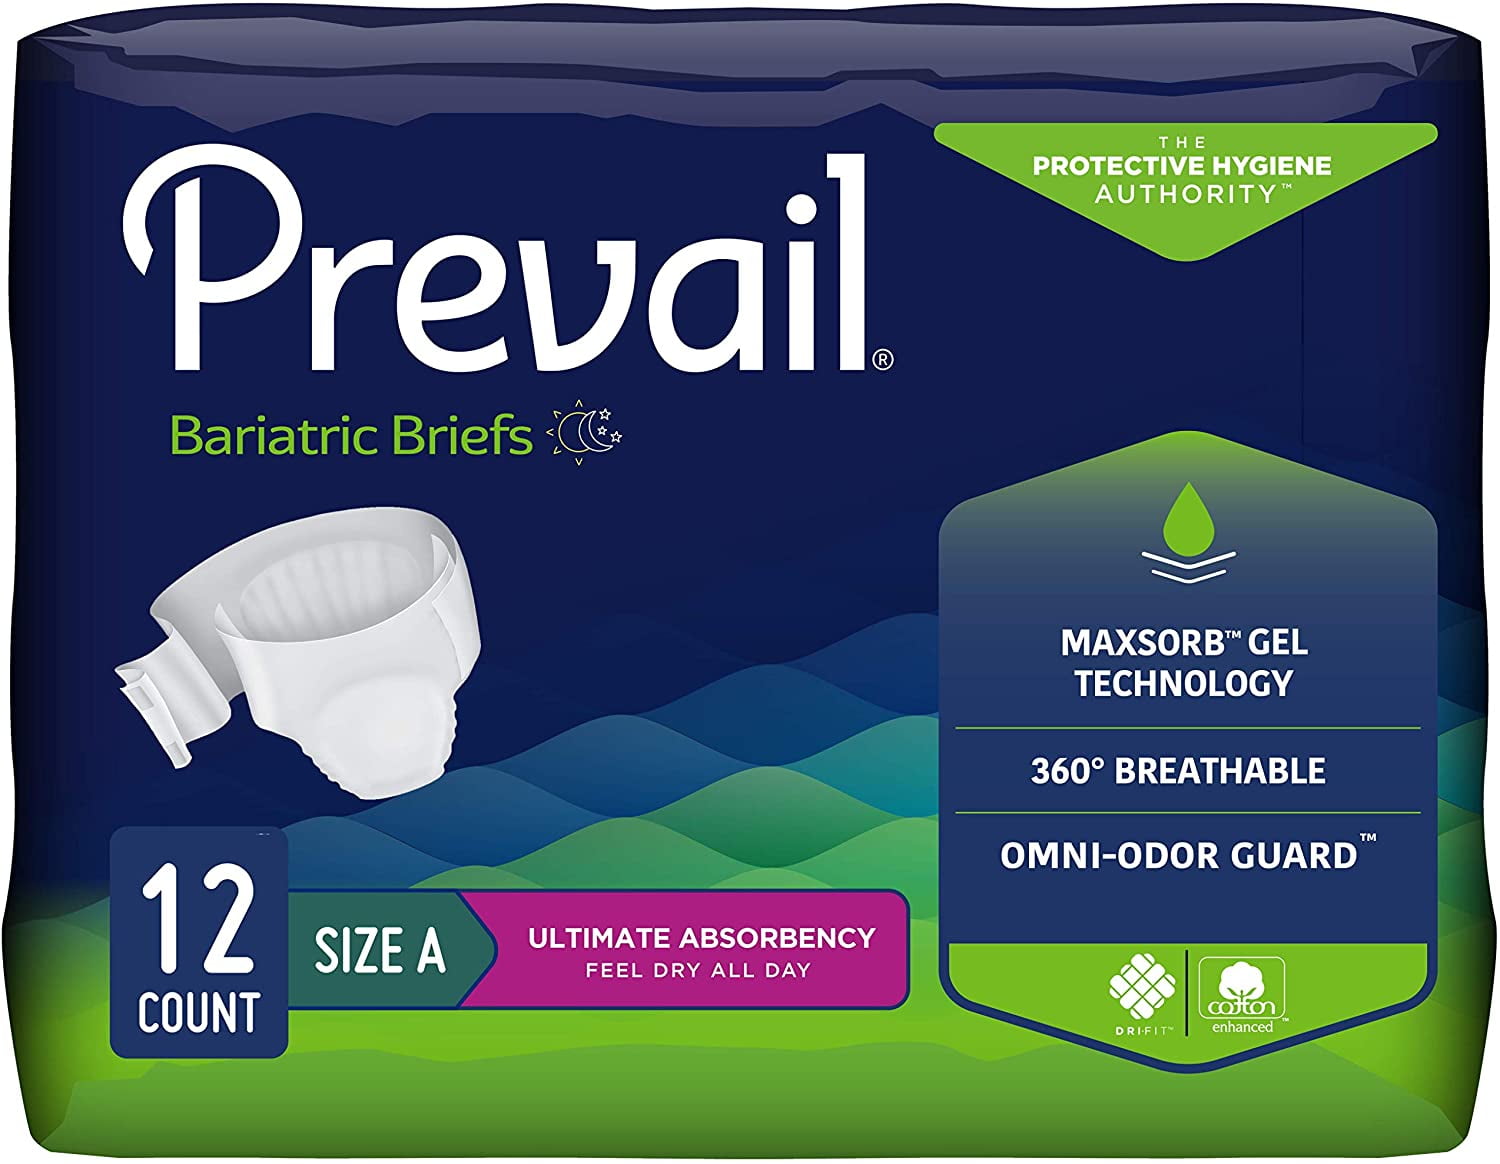 Prevail Bariatric Briefs  Duraline Medical Products Canada